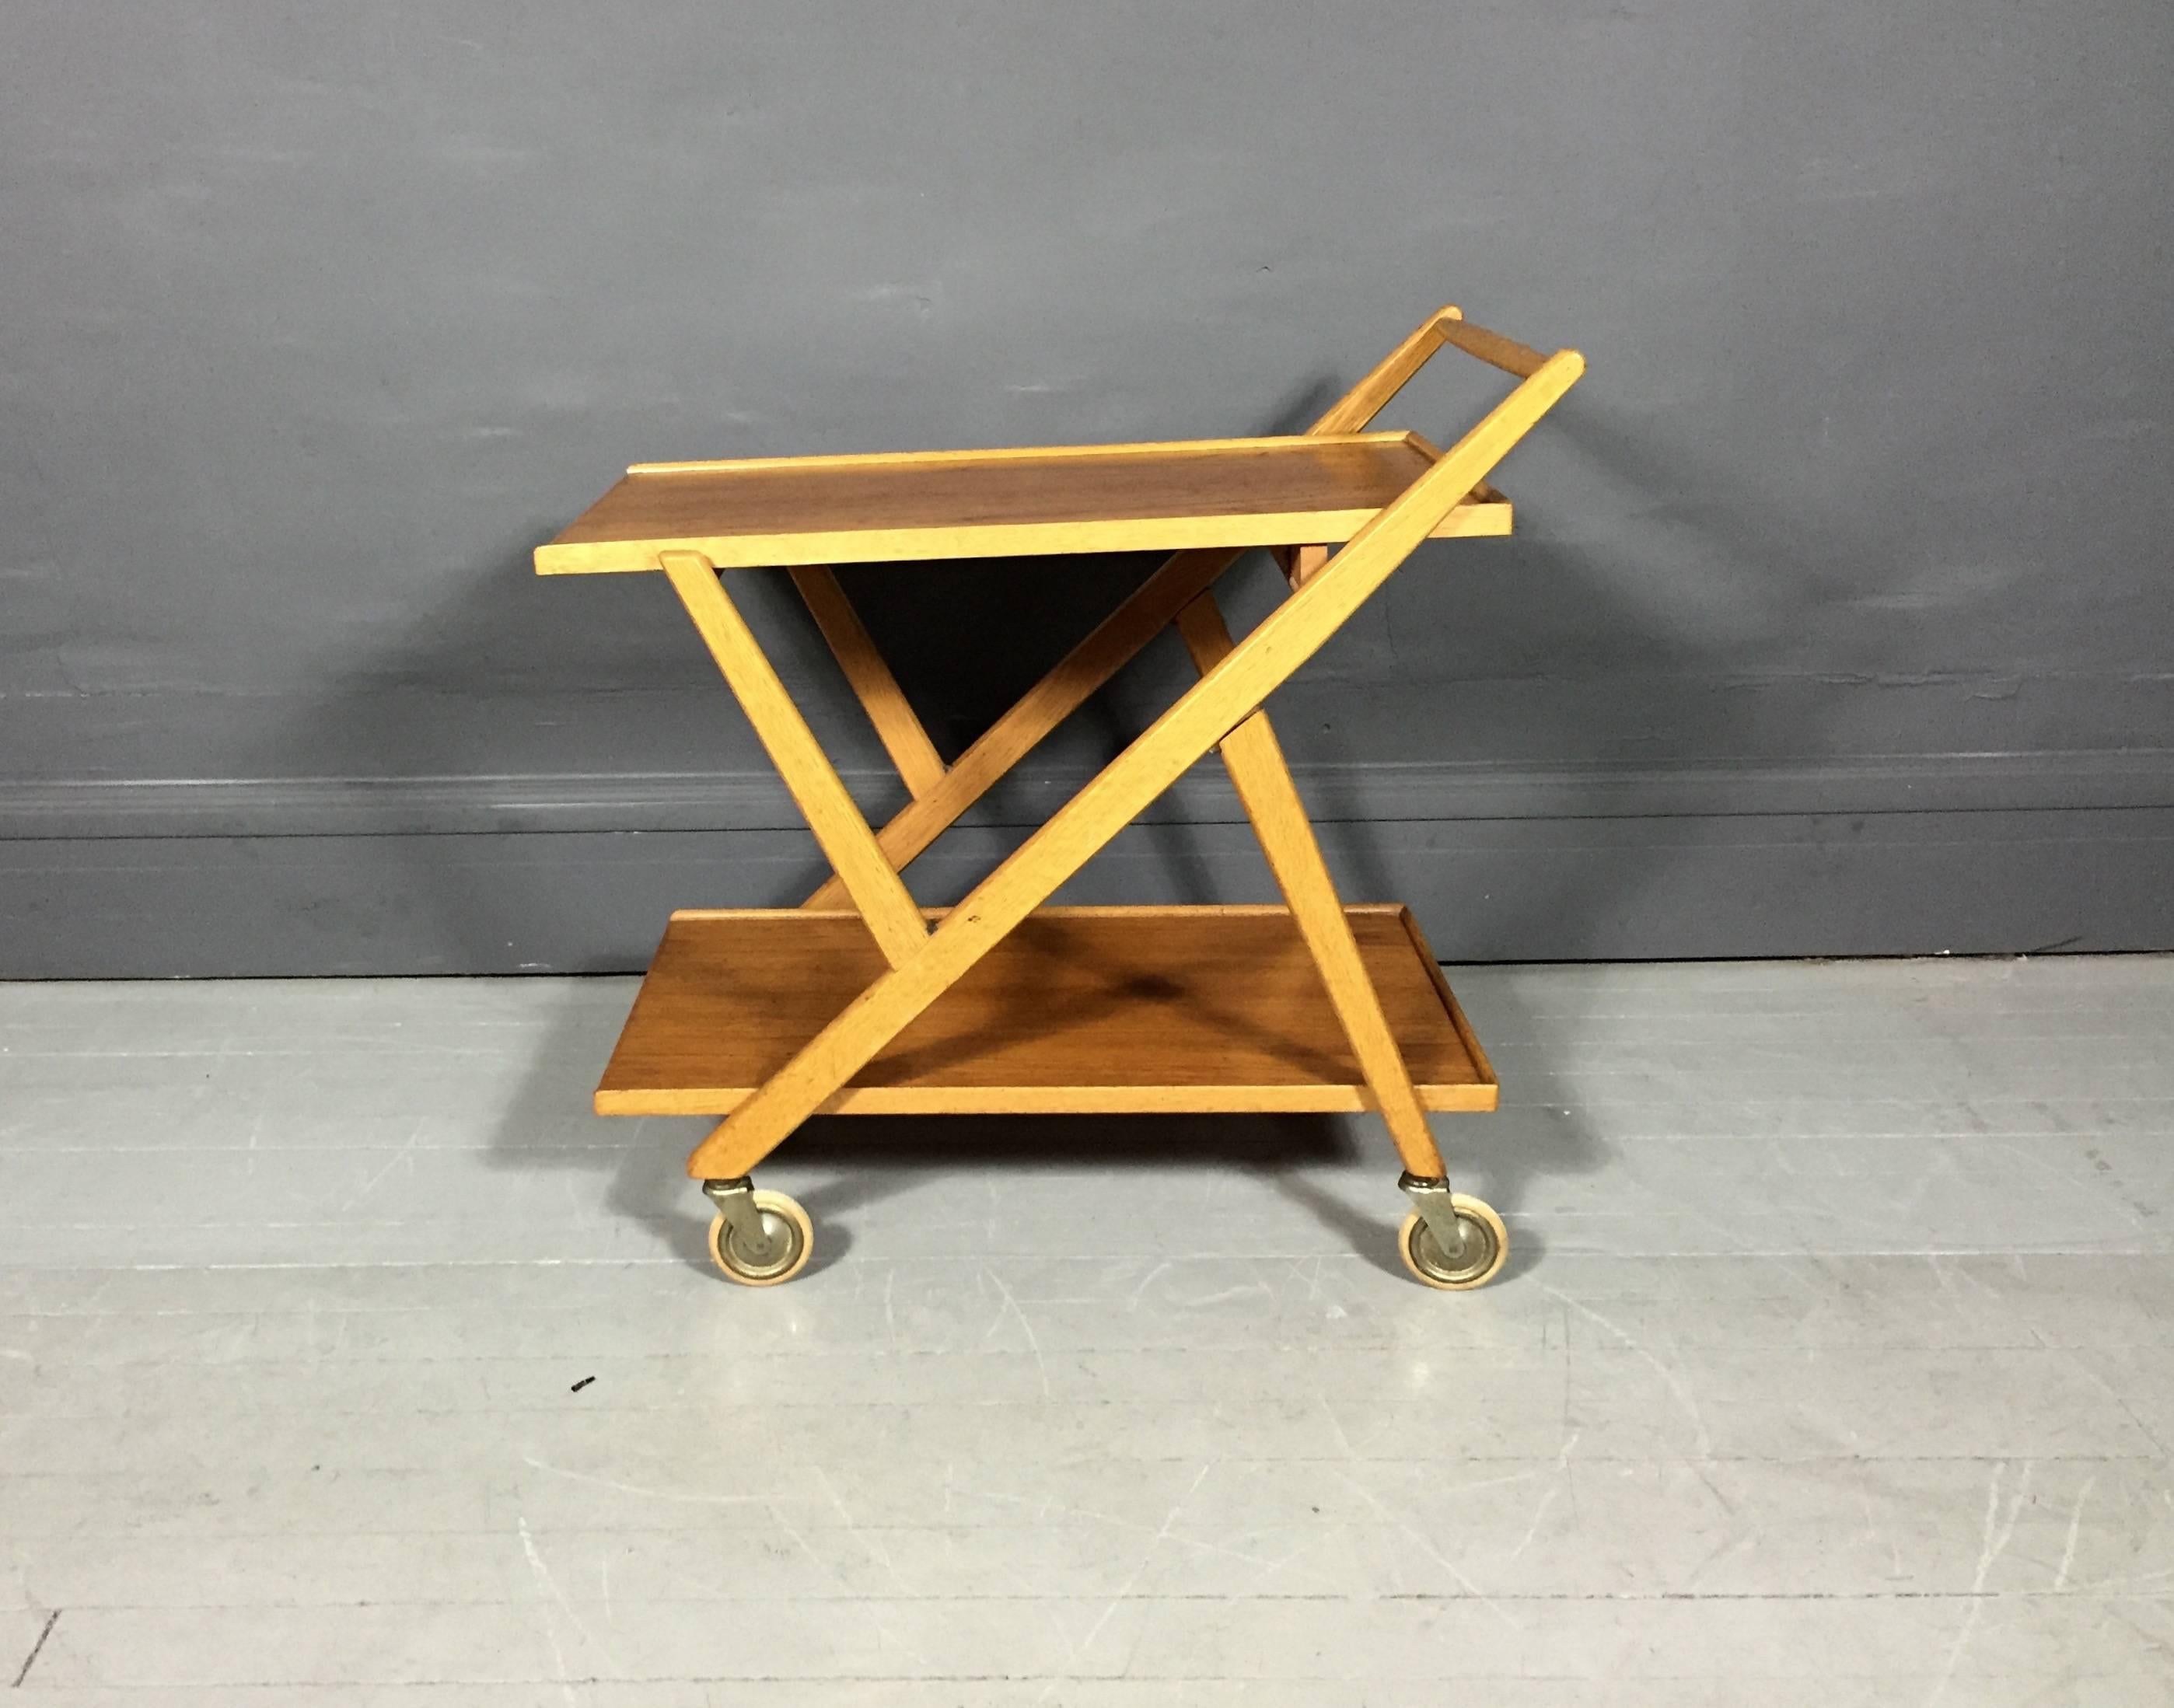 Scandinavian modern at its best. Oak frame two-tier trolley barcart that collapses to flat position with rubber and brass wheels by Fröseke AB, Nybrofabriken, Sweden, 1950s.